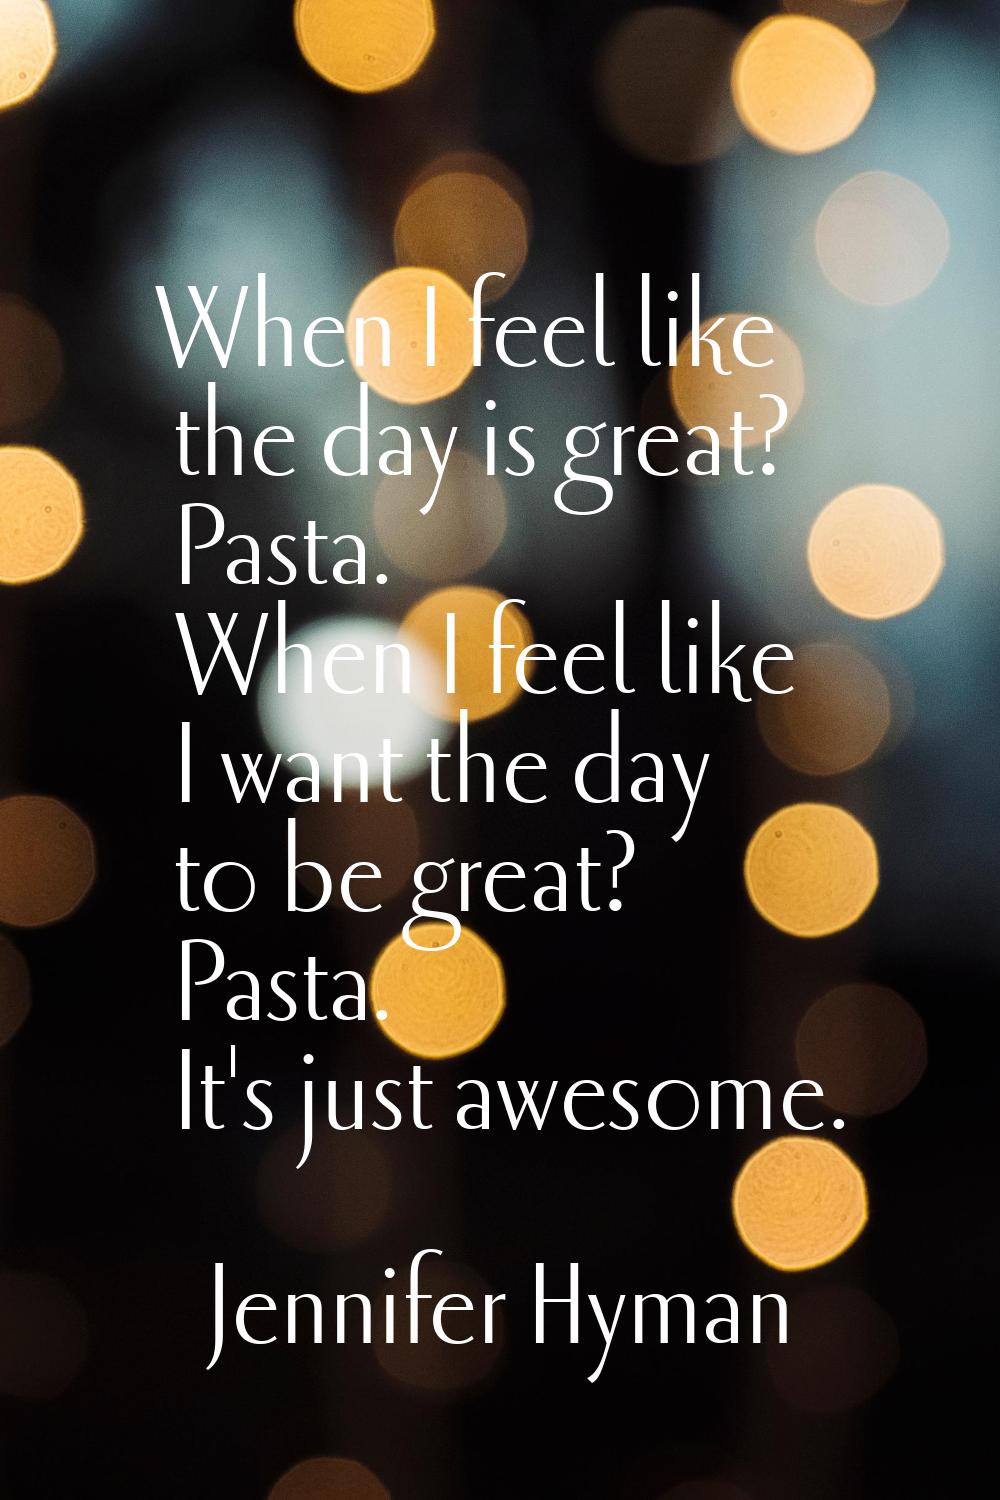 When I feel like the day is great? Pasta. When I feel like I want the day to be great? Pasta. It's 